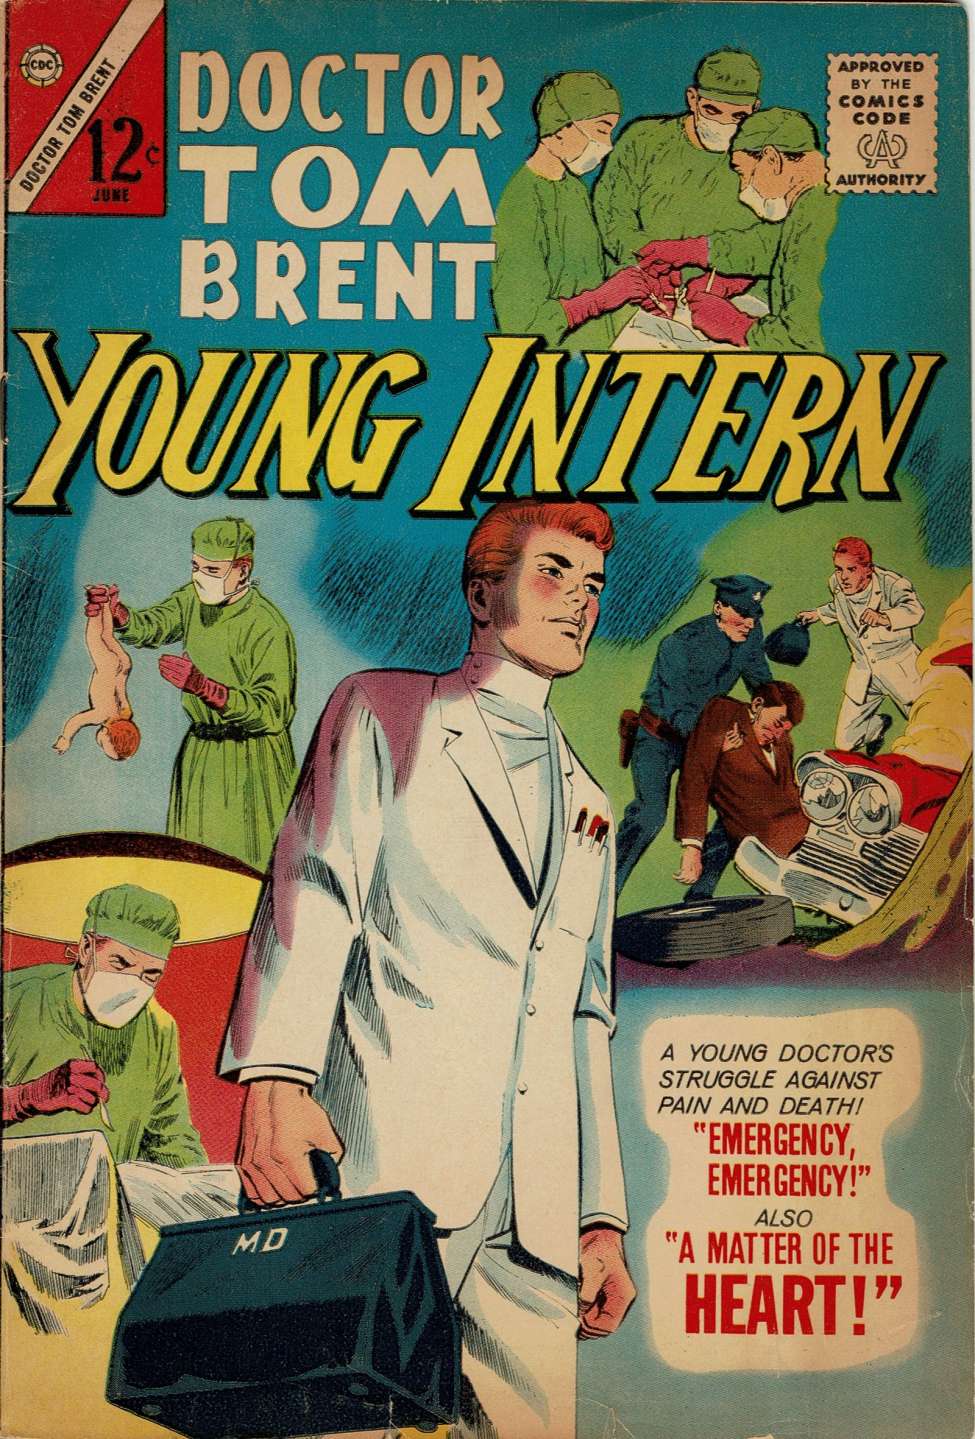 Book Cover For Doctor Tom Brent, Young Intern 3